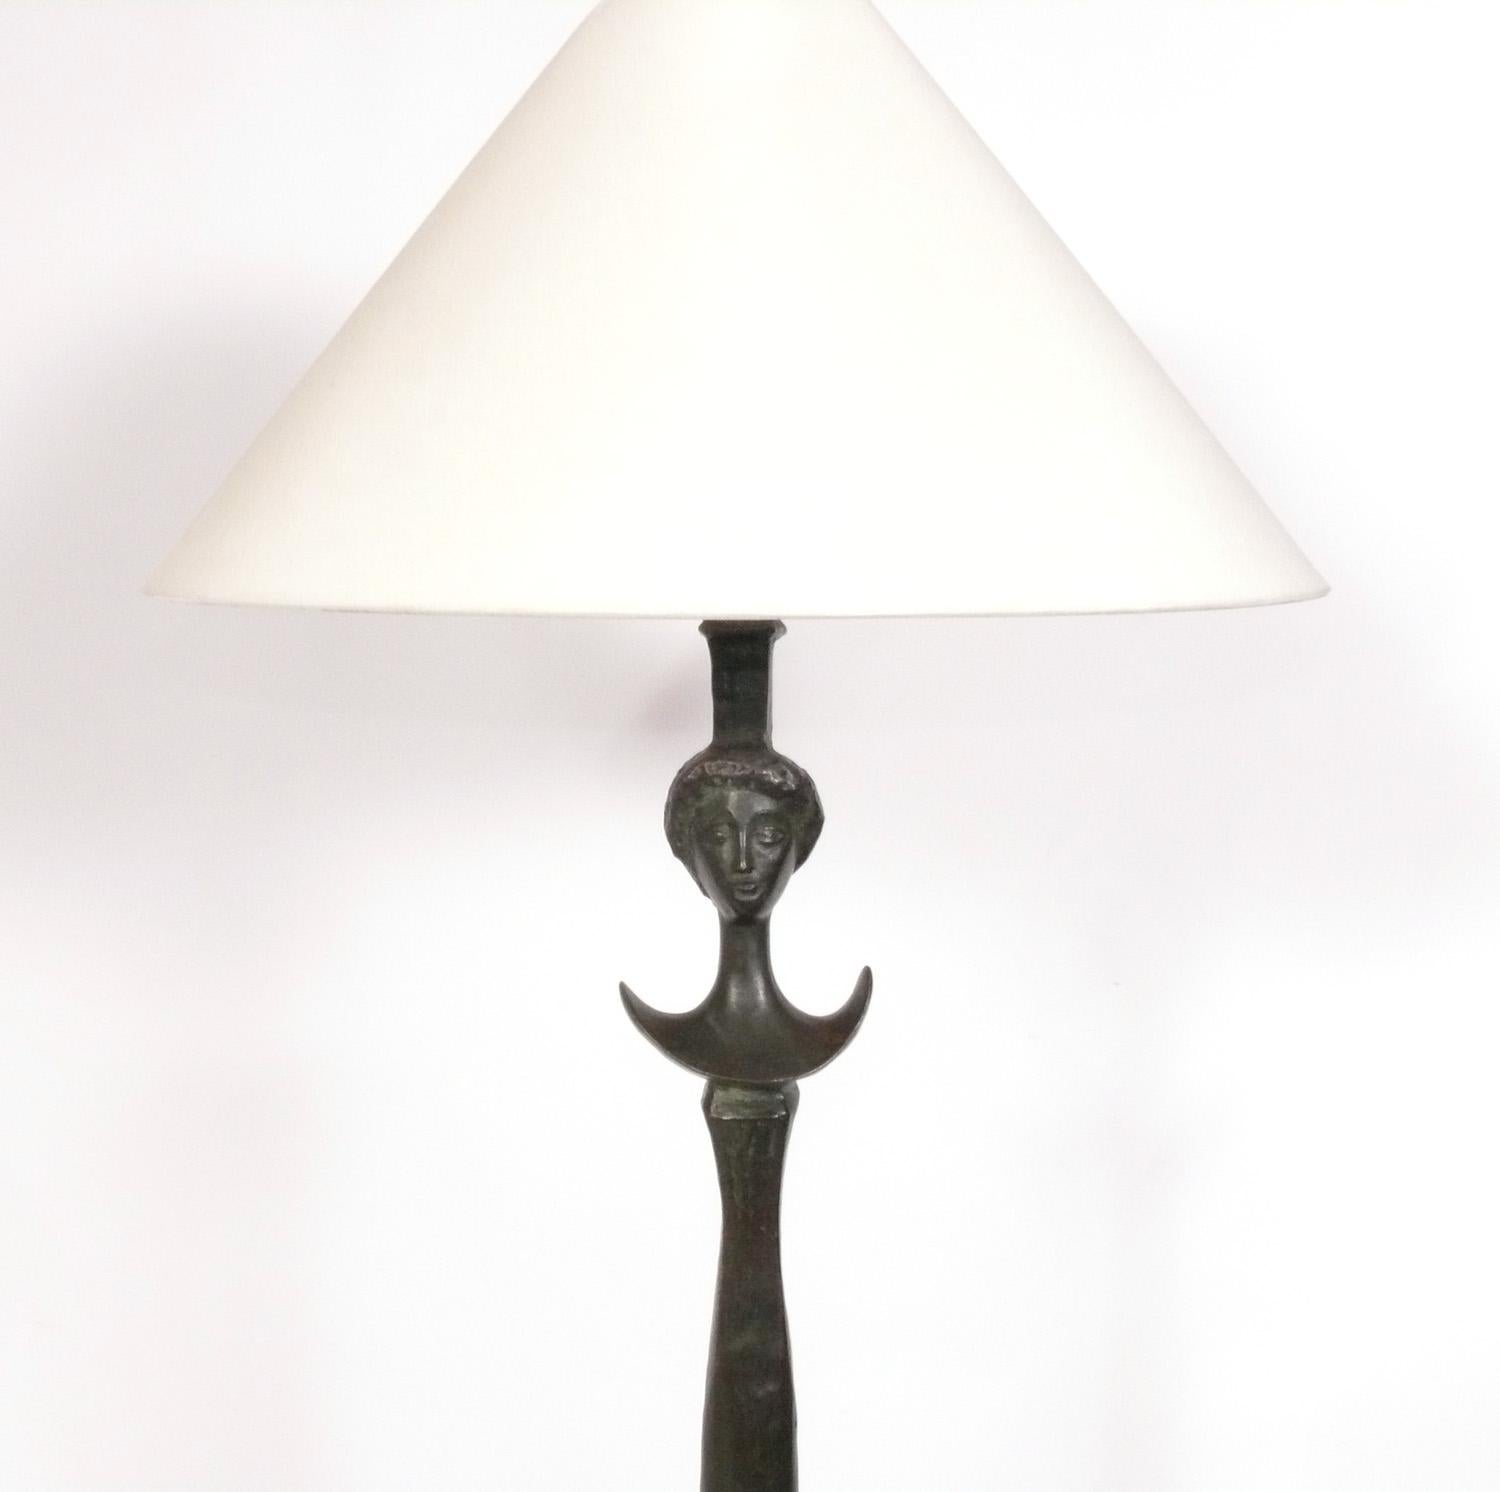 Sculptural Solid Bronze Floor Tete de Femme Model Floor Lamp, originally designed by Alberto Giacometti, circa 1934, this example is probably an unauthorized recast from the 1990s. It retains it's warm original patina and at $2600 vs. the current